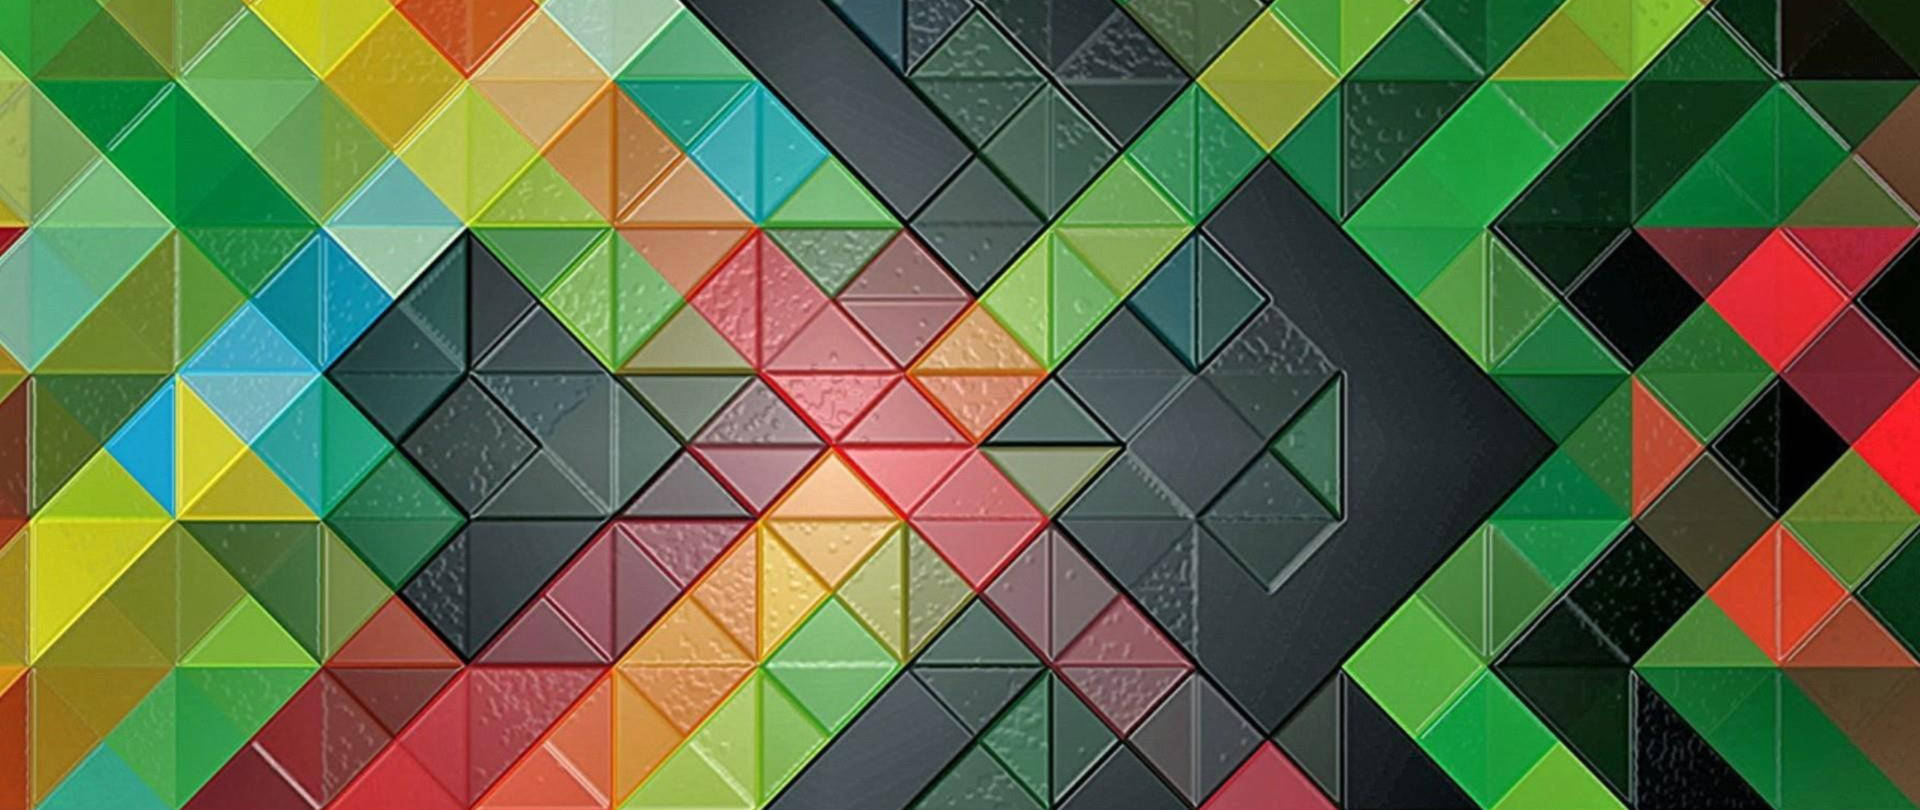 Colorful Abstract With Platonic Solids Wallpaper